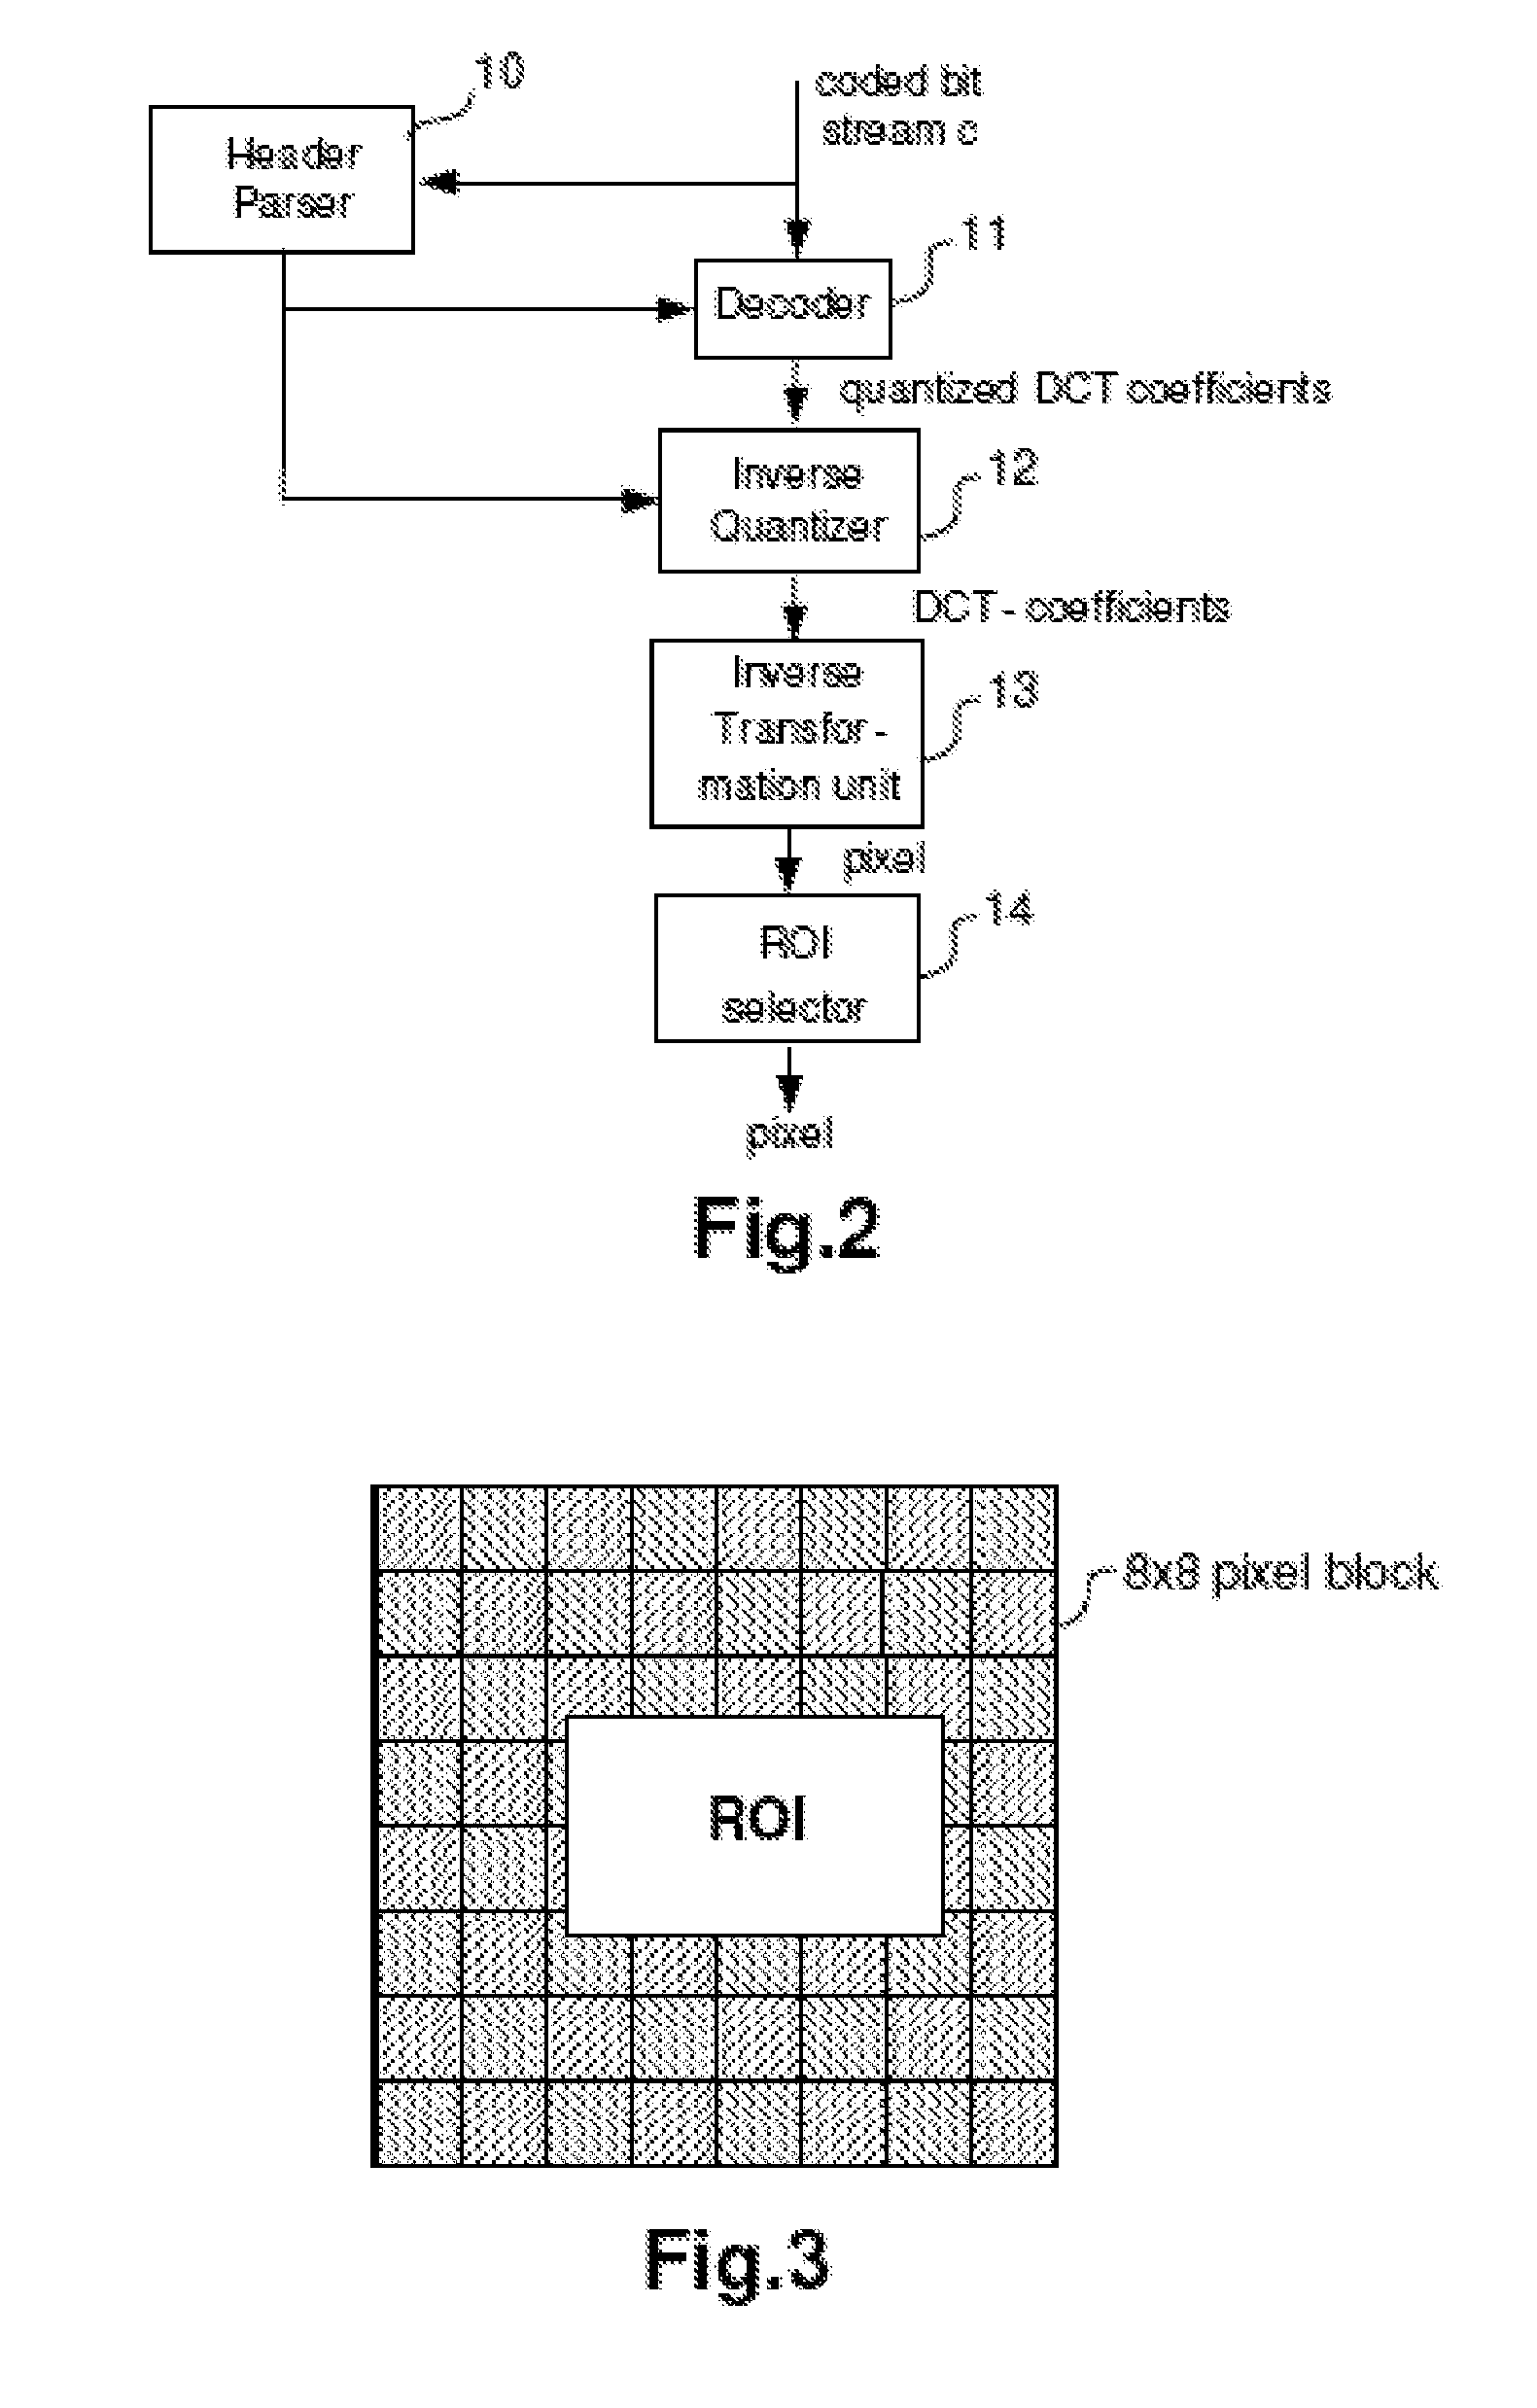 Decoder for selectively decoding predetermined data units from a coded bit stream